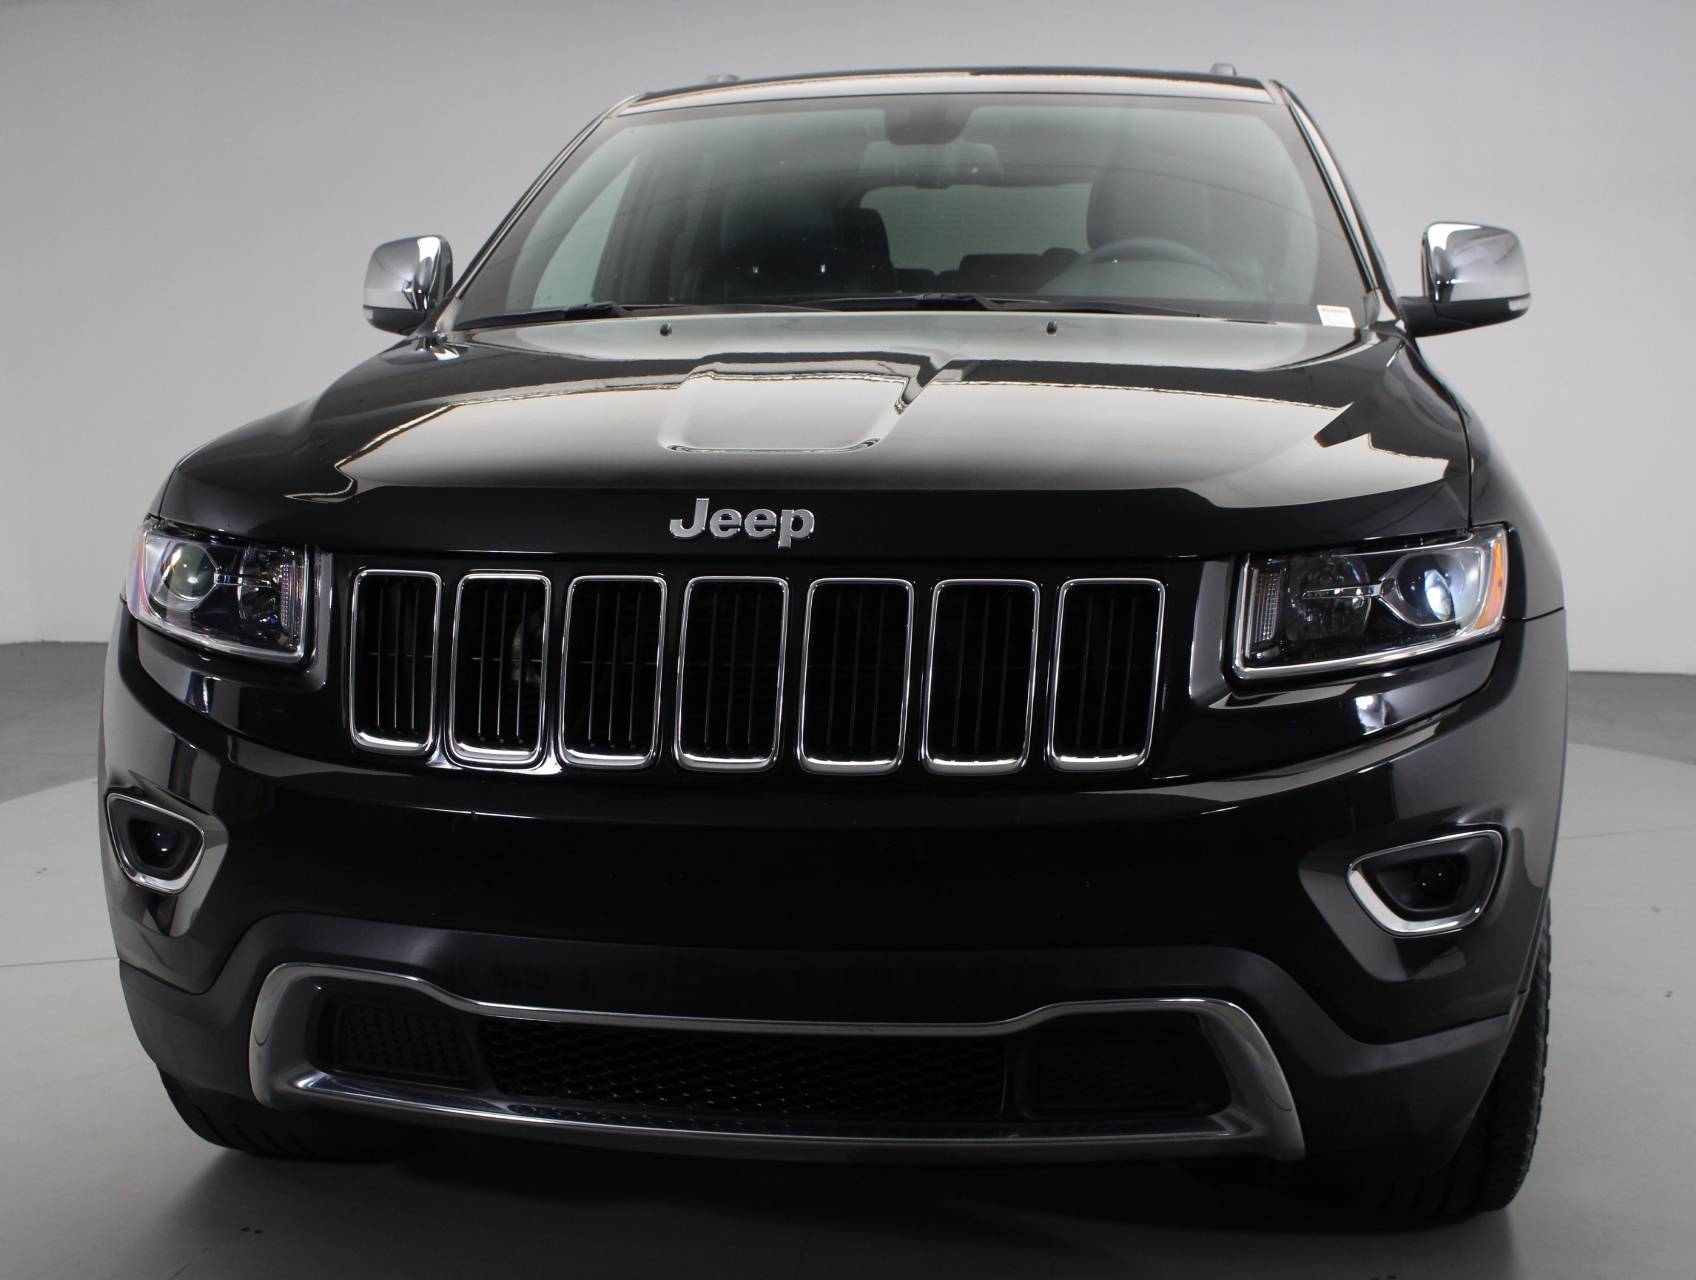 Florida Fine Cars - Used JEEP GRAND CHEROKEE 2015 WEST PALM LIMITED